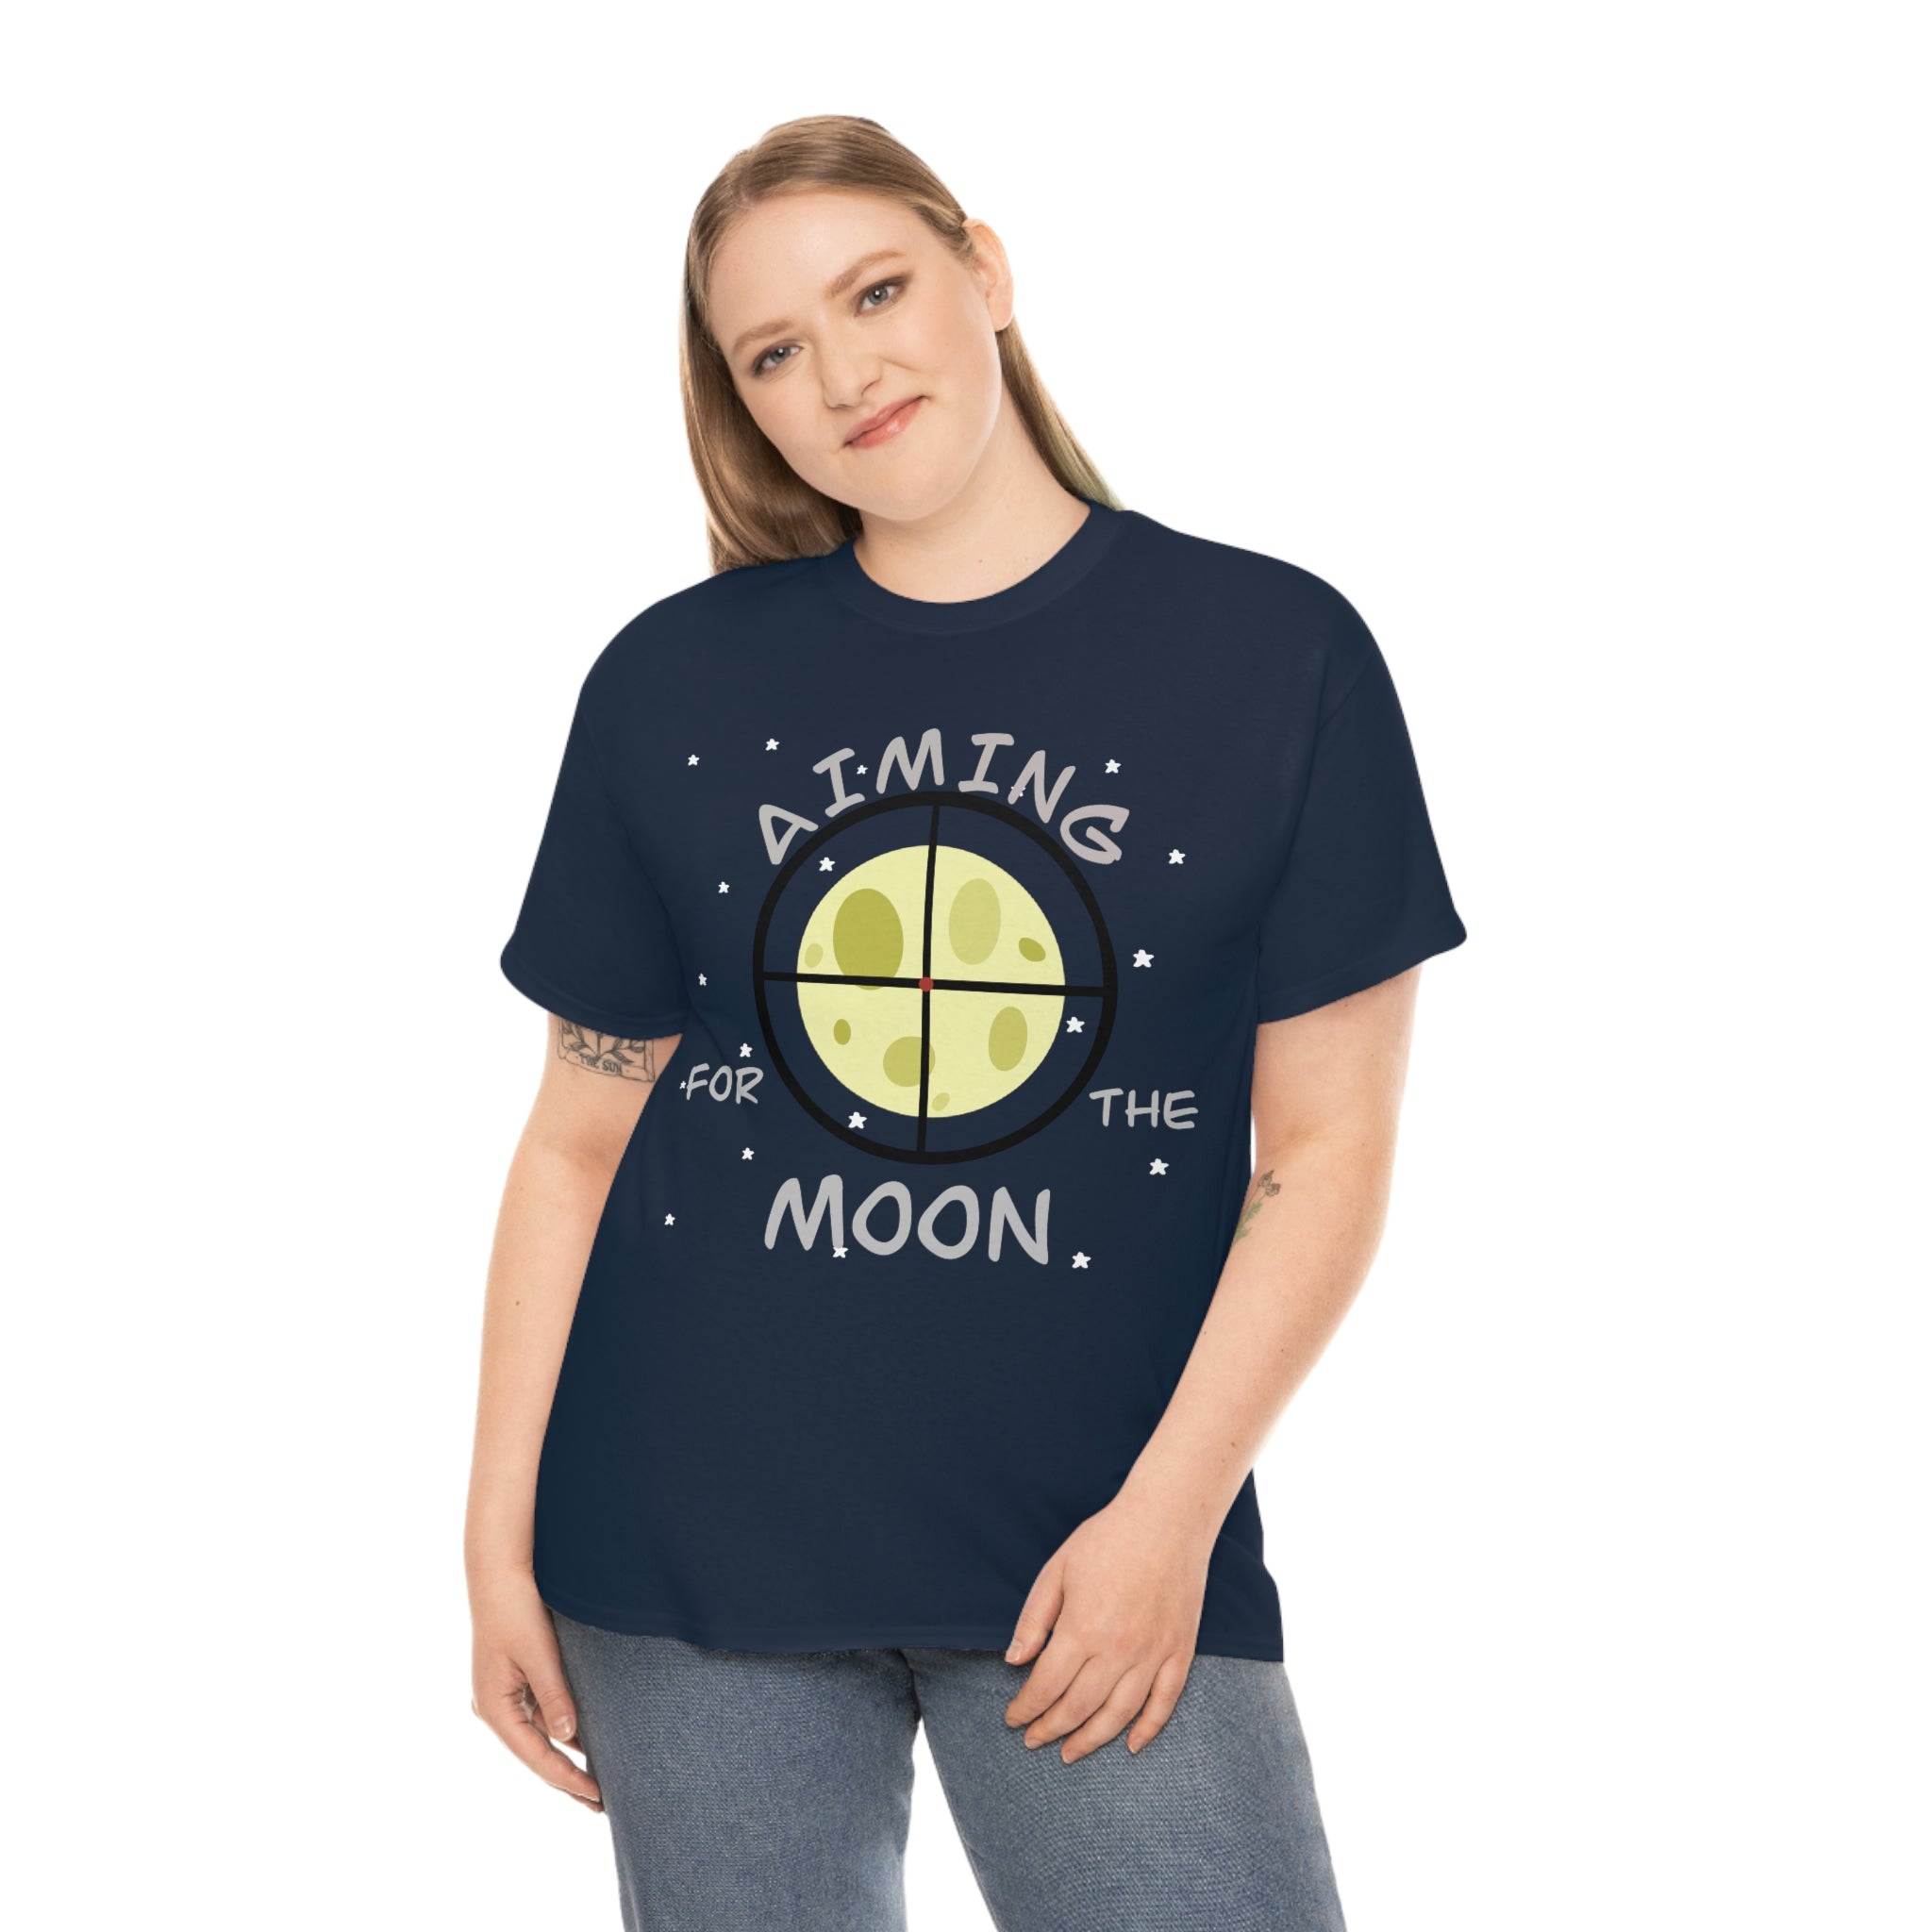 Aiming For The Moon T-Shirt